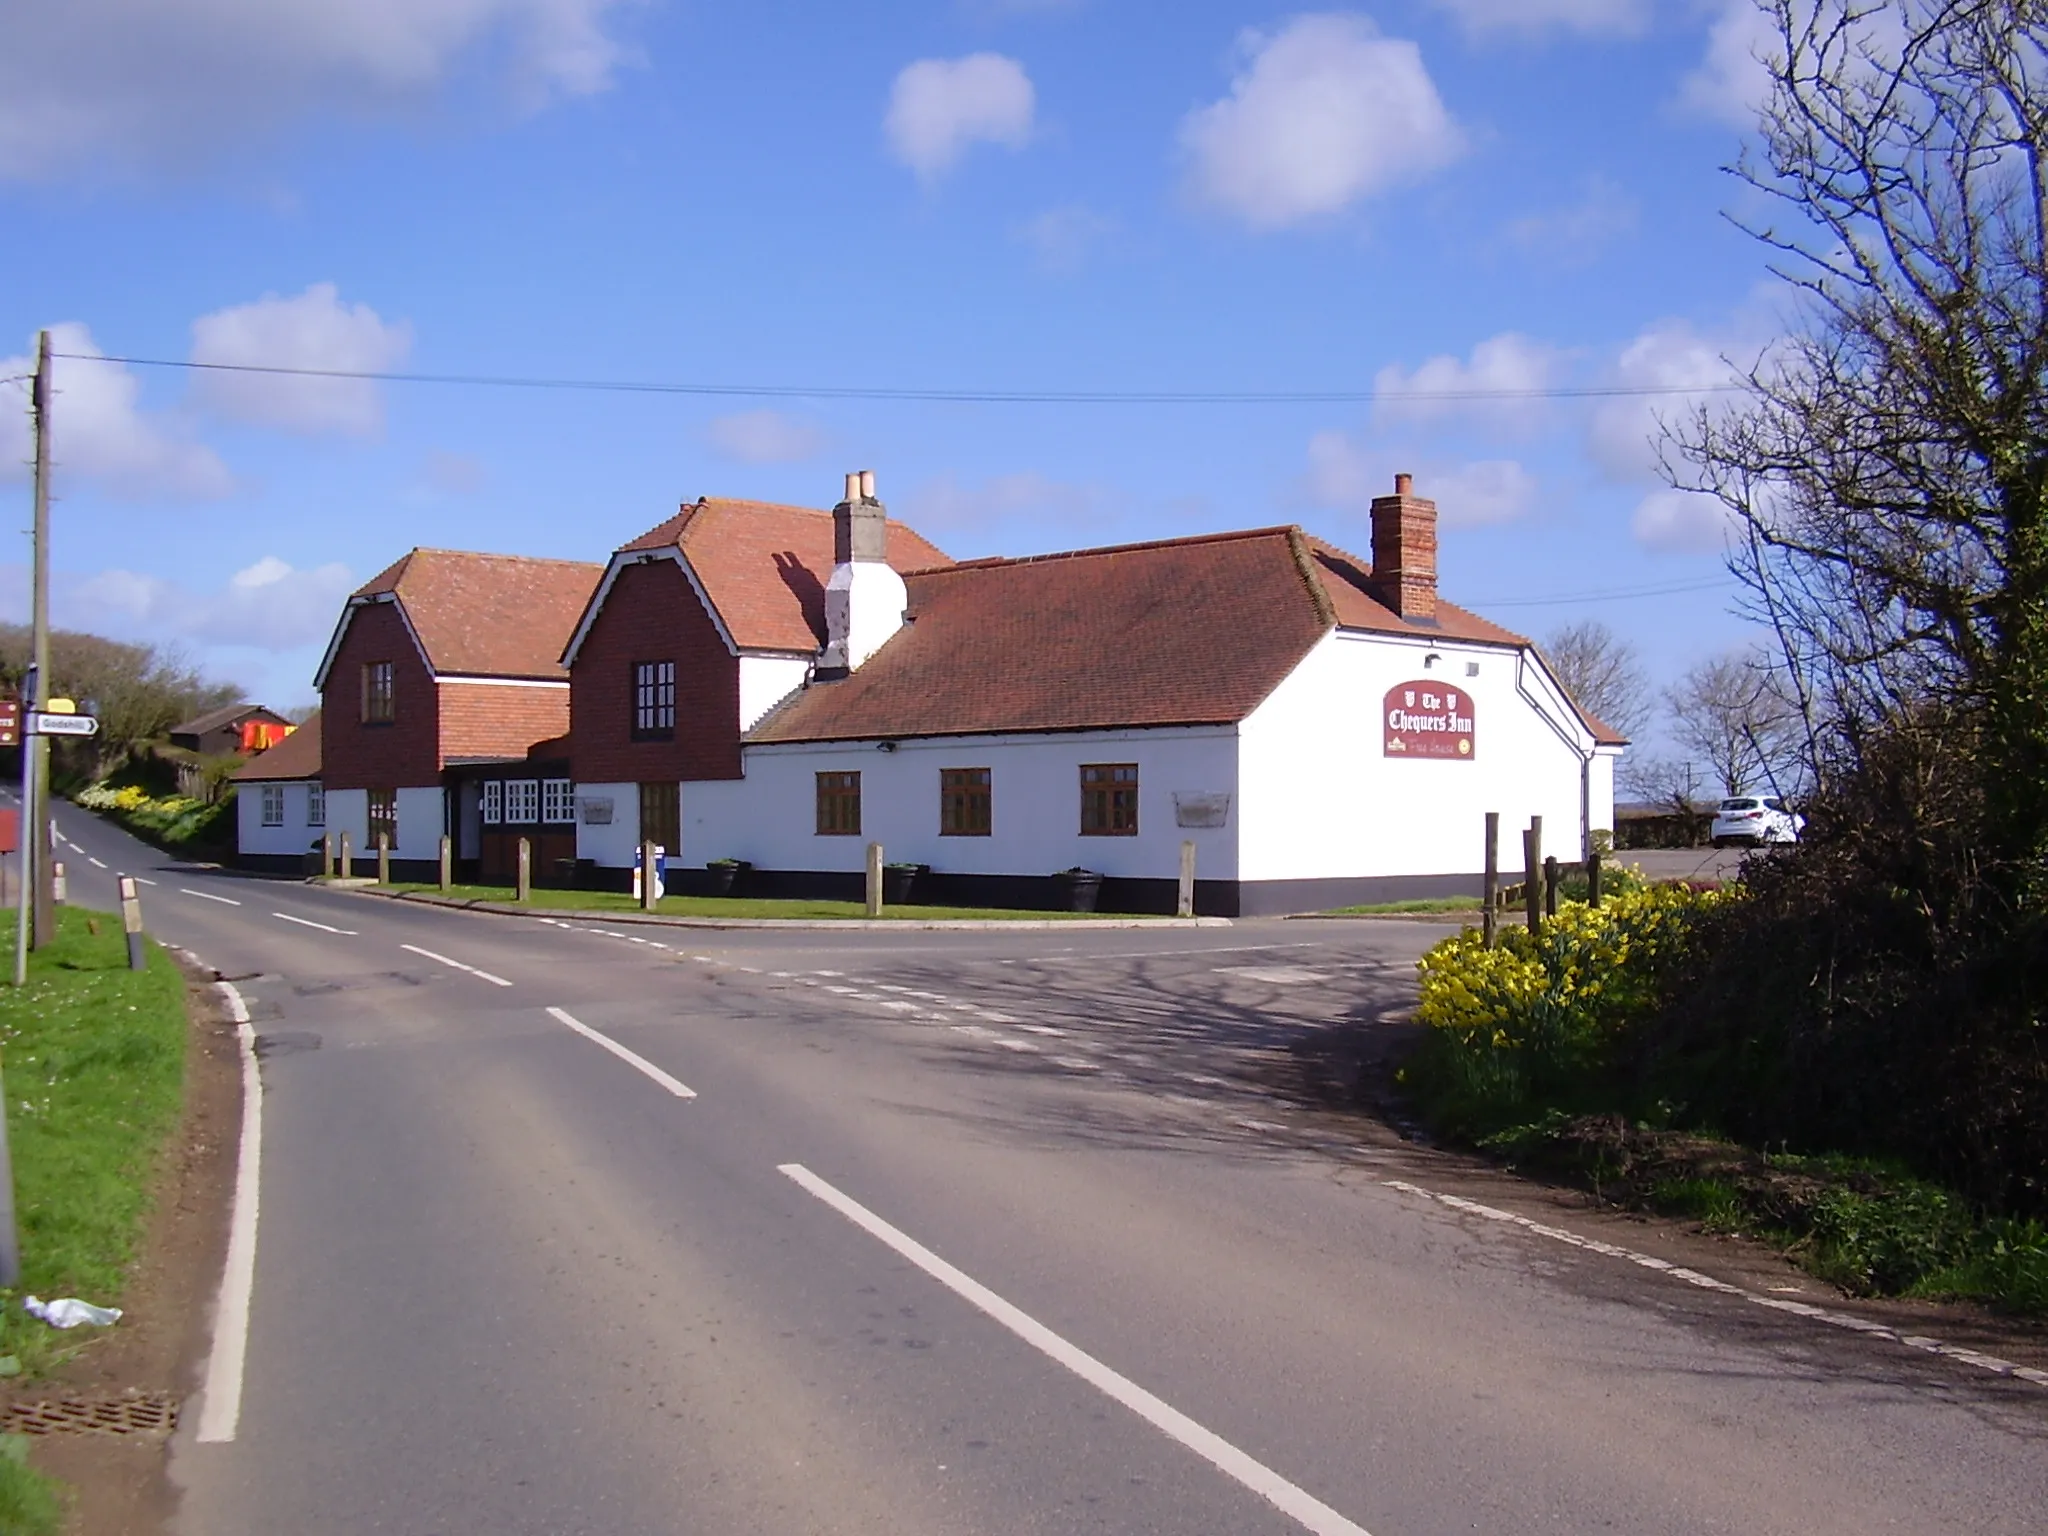 Photo showing: The Chequers Inn, Rookley, Isle of Wight, UK